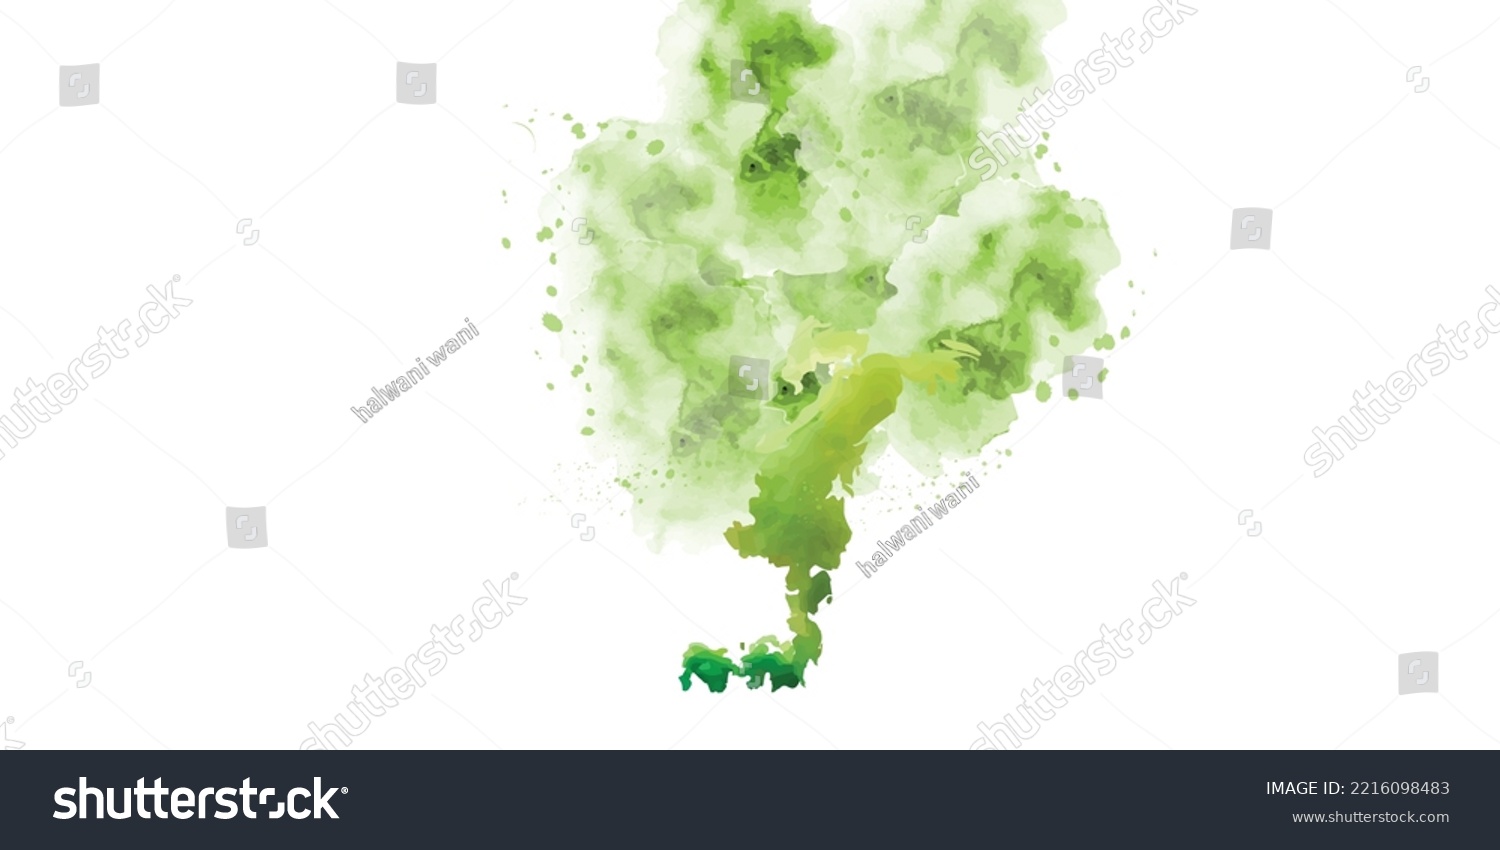 SVG of green and yellow watercolor isolated on a white background. svg